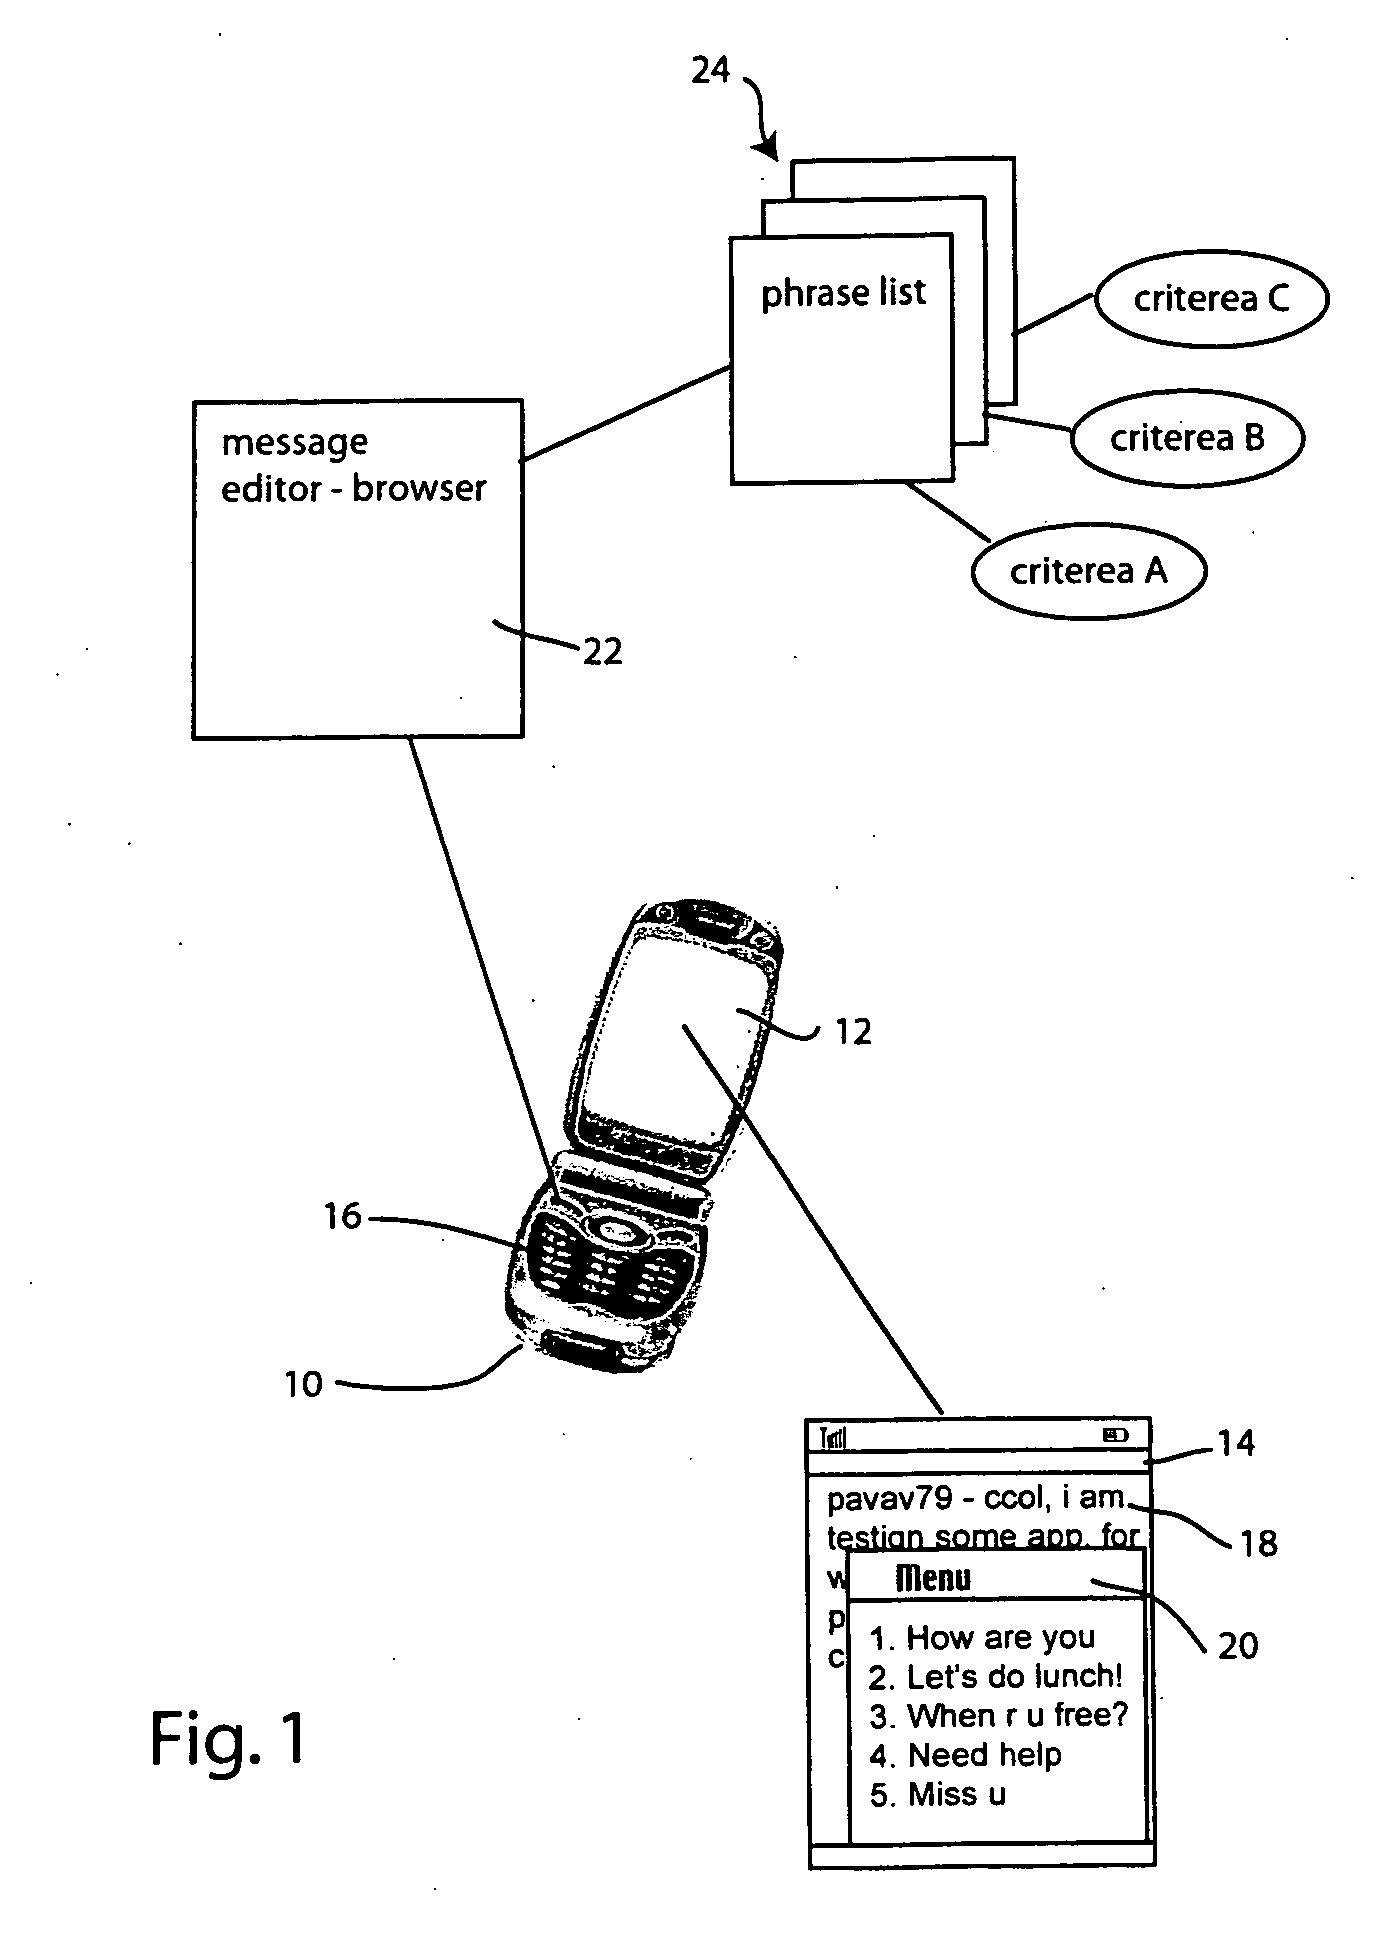 Method for creating and using phrase history for accelerating instant messaging input on mobile devices